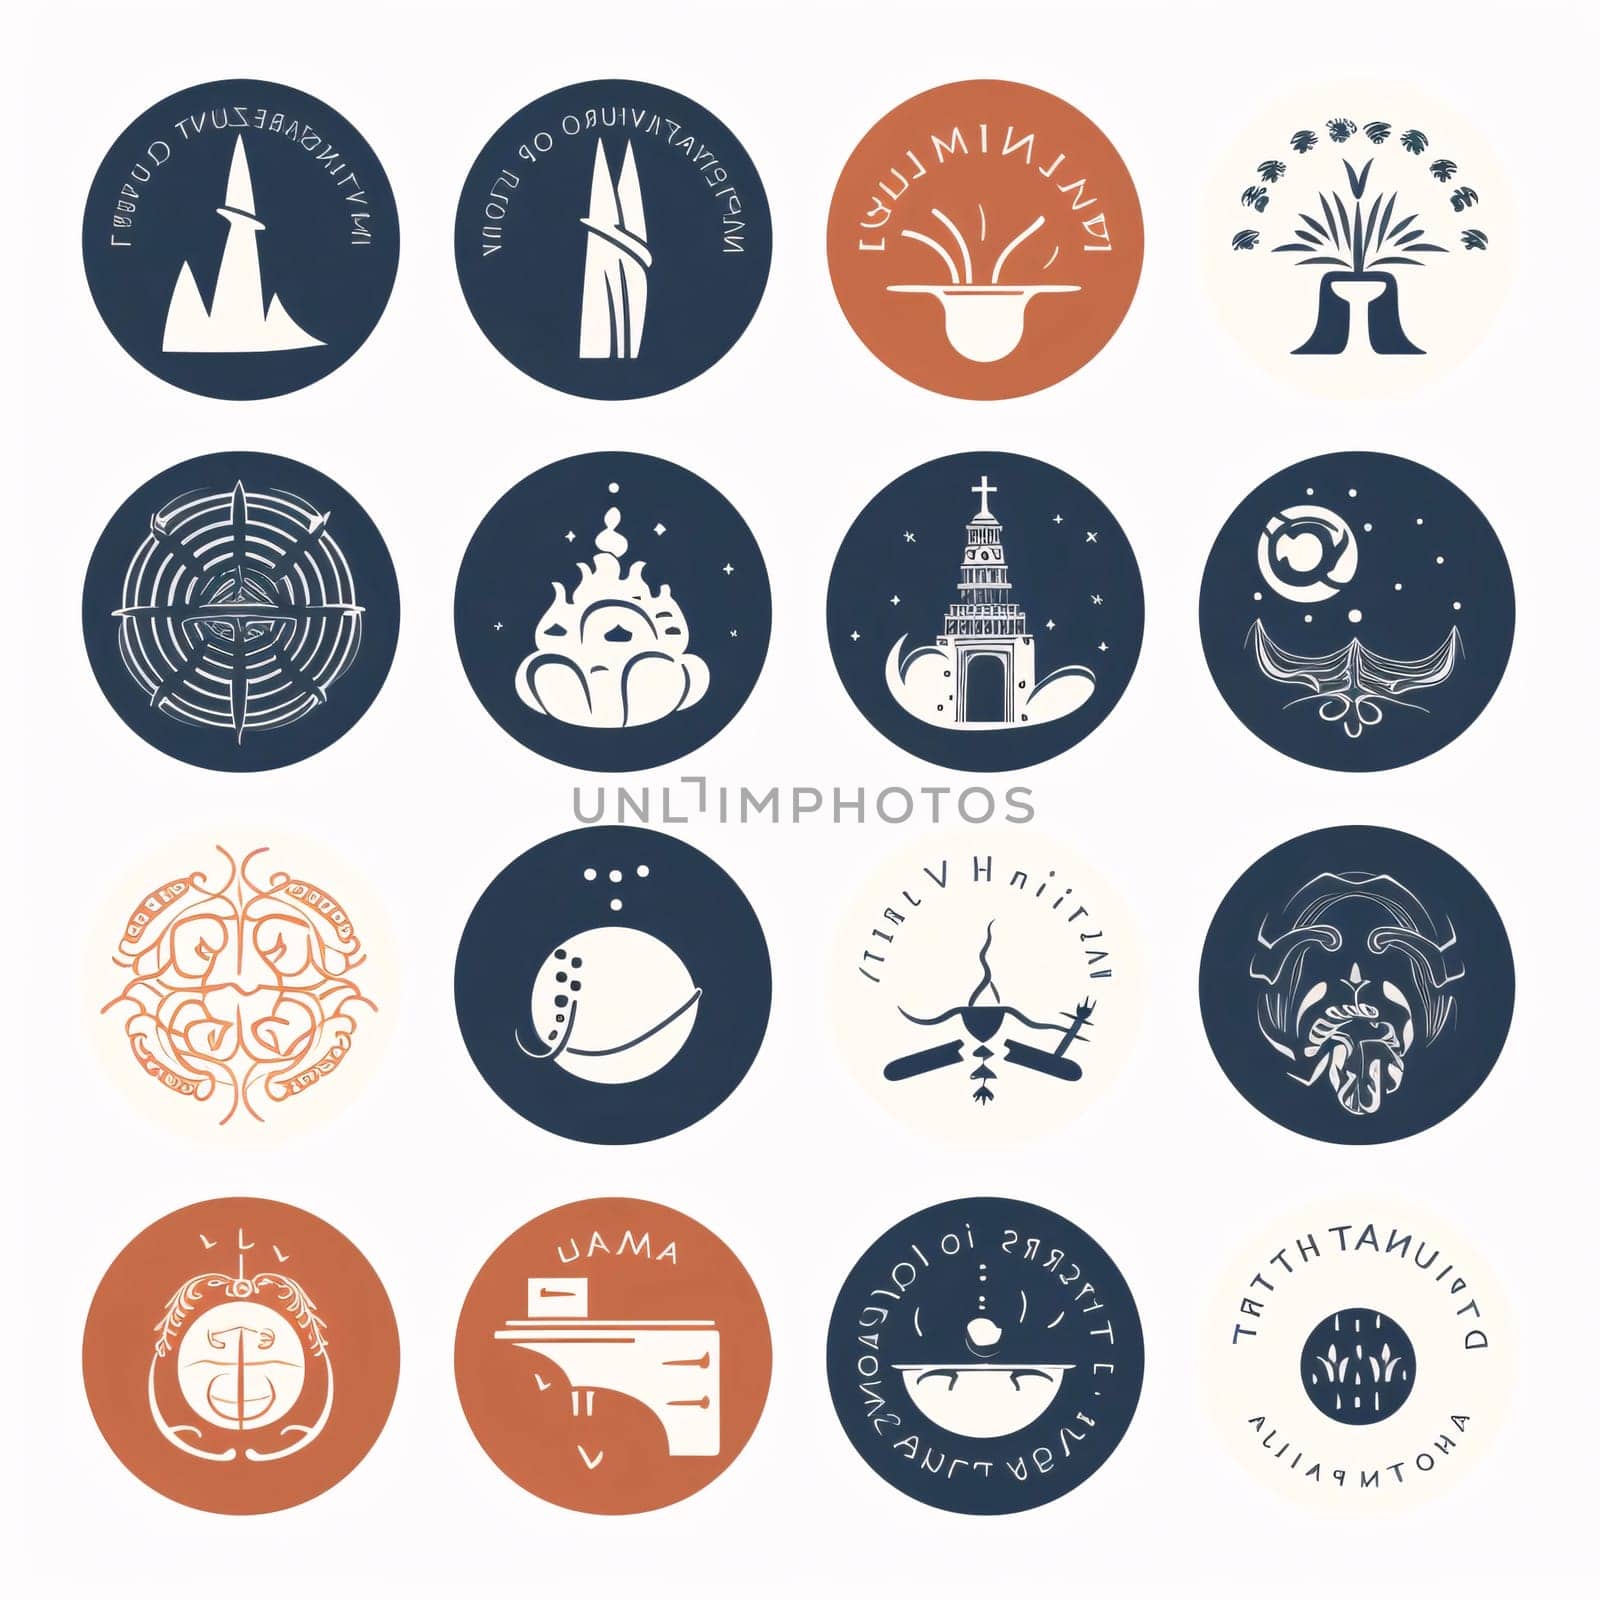 New icons collection: Set of vintage travel and tourism icons and symbols. Vector illustration.